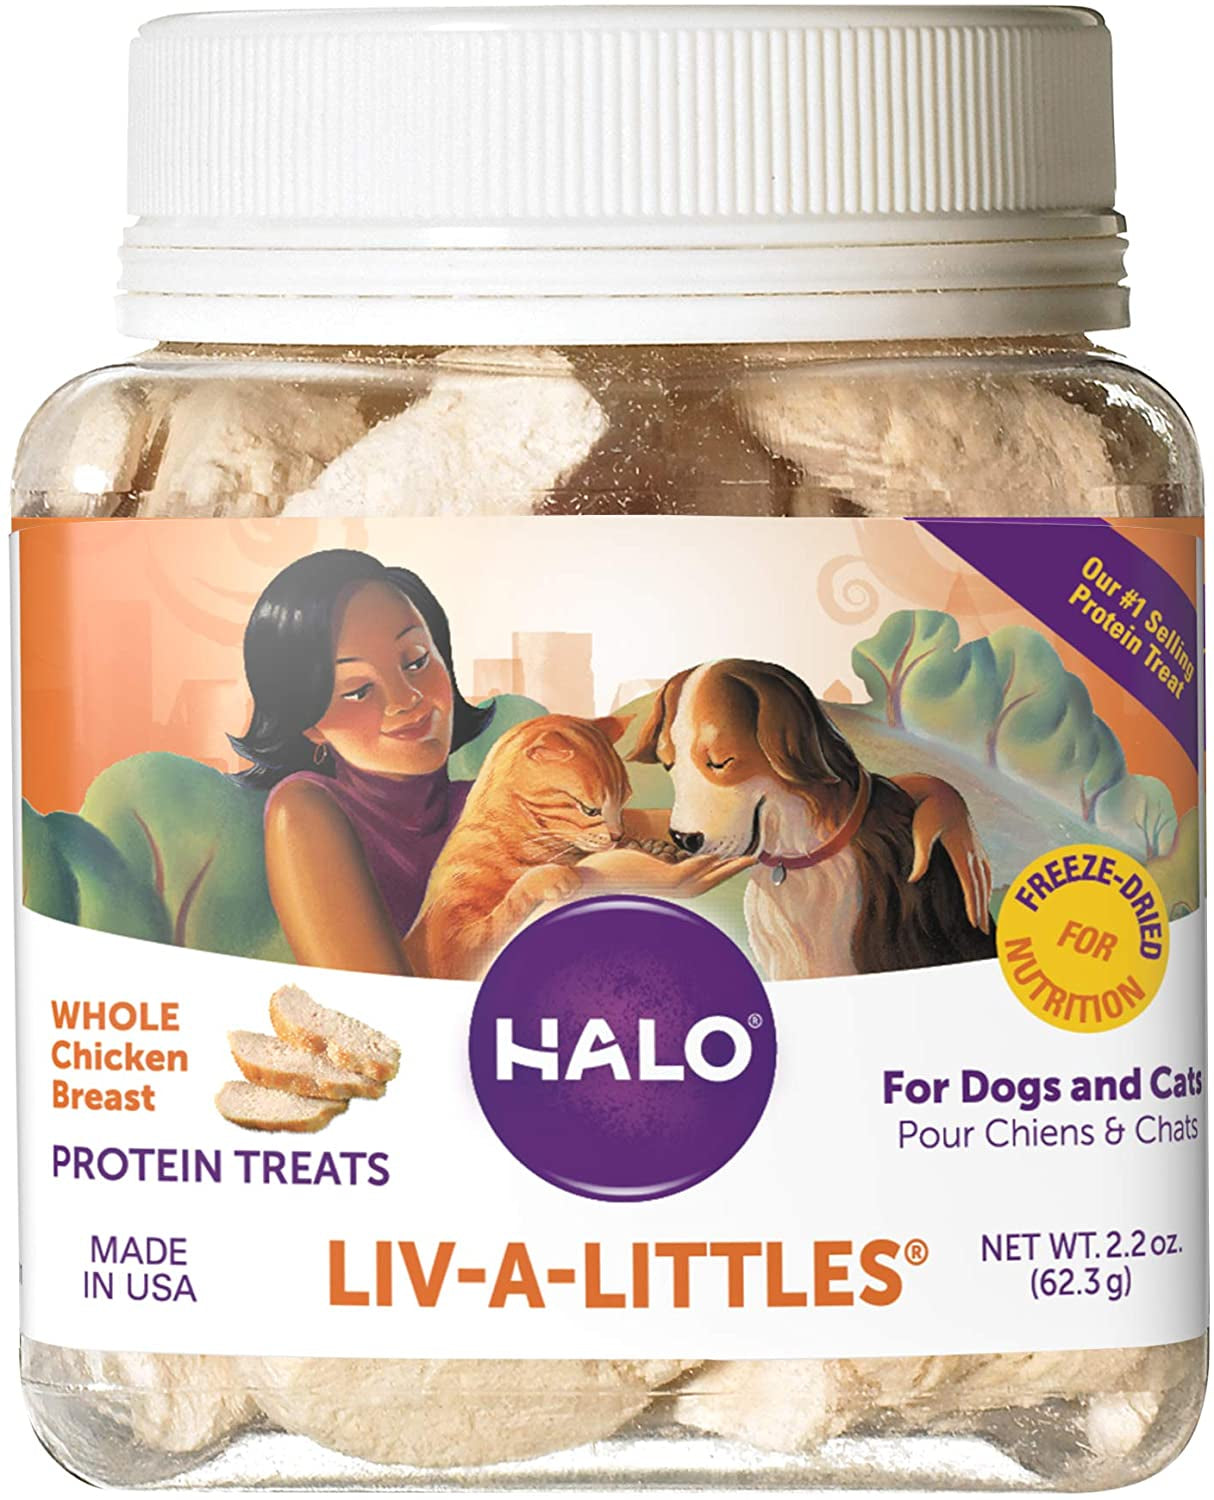 Halo Liv-A-Littles Dog and Cat Treats, Training Treats for Dogs, Healthy, Low Calorie